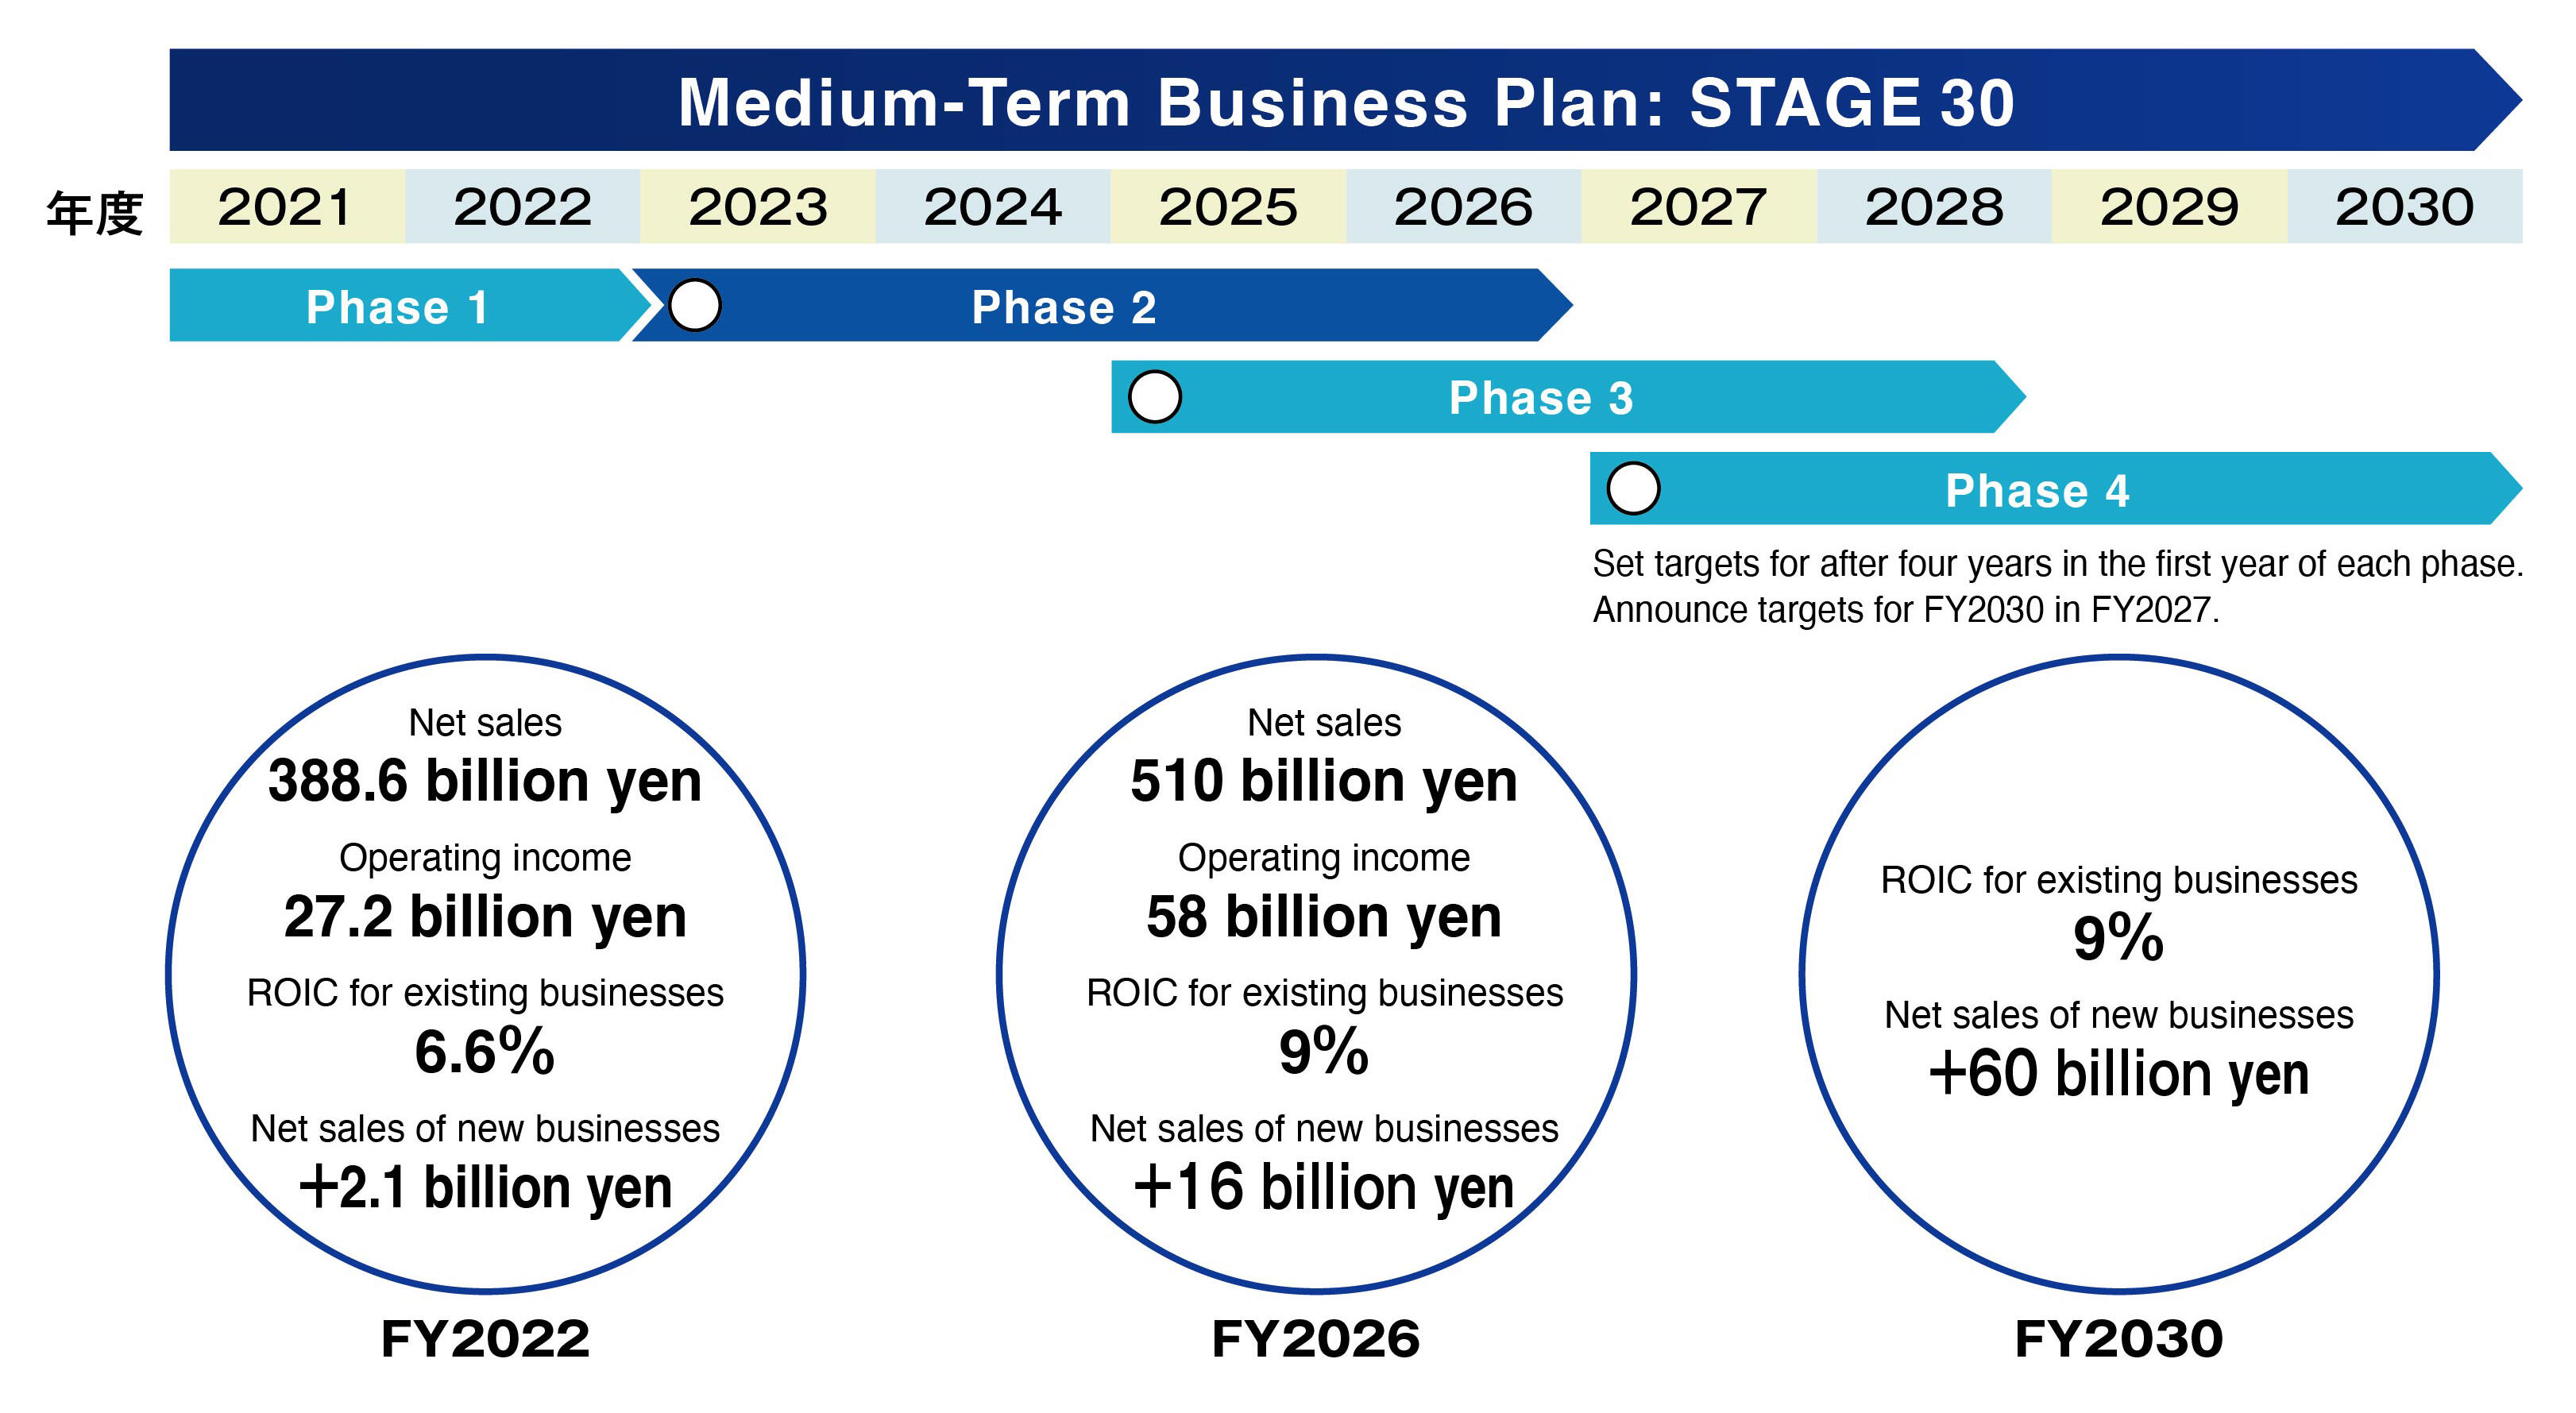 Overview of the Medium-Term Business Plan